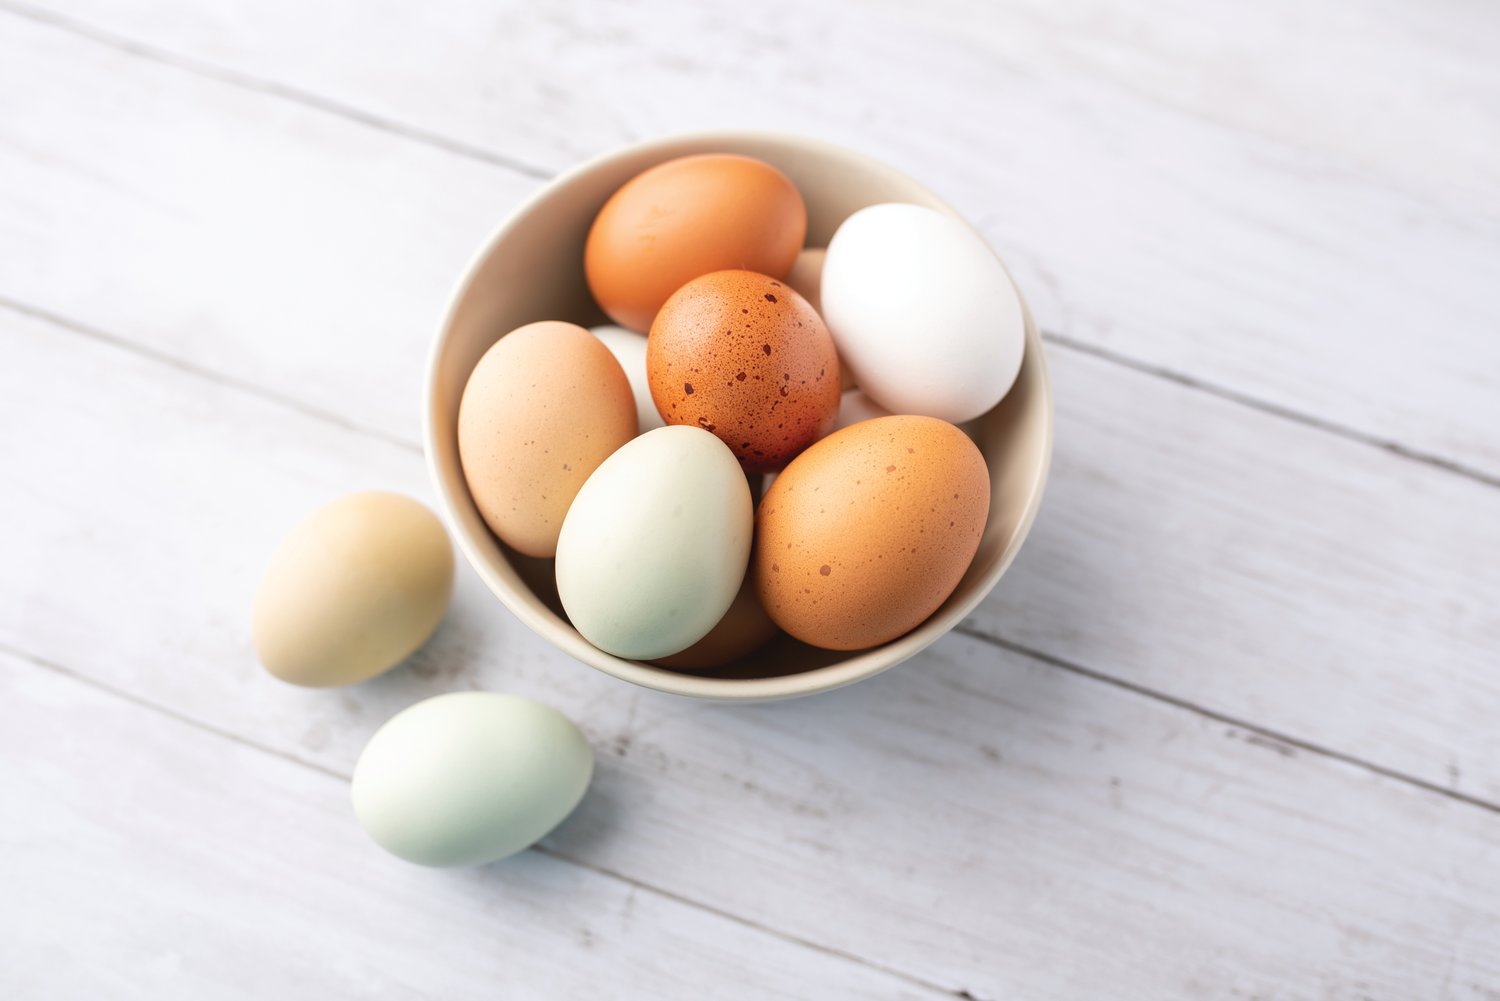 Boiled, poached, steamed, baked, fried, deviled or pickled, eggs are limited only by your imagination.